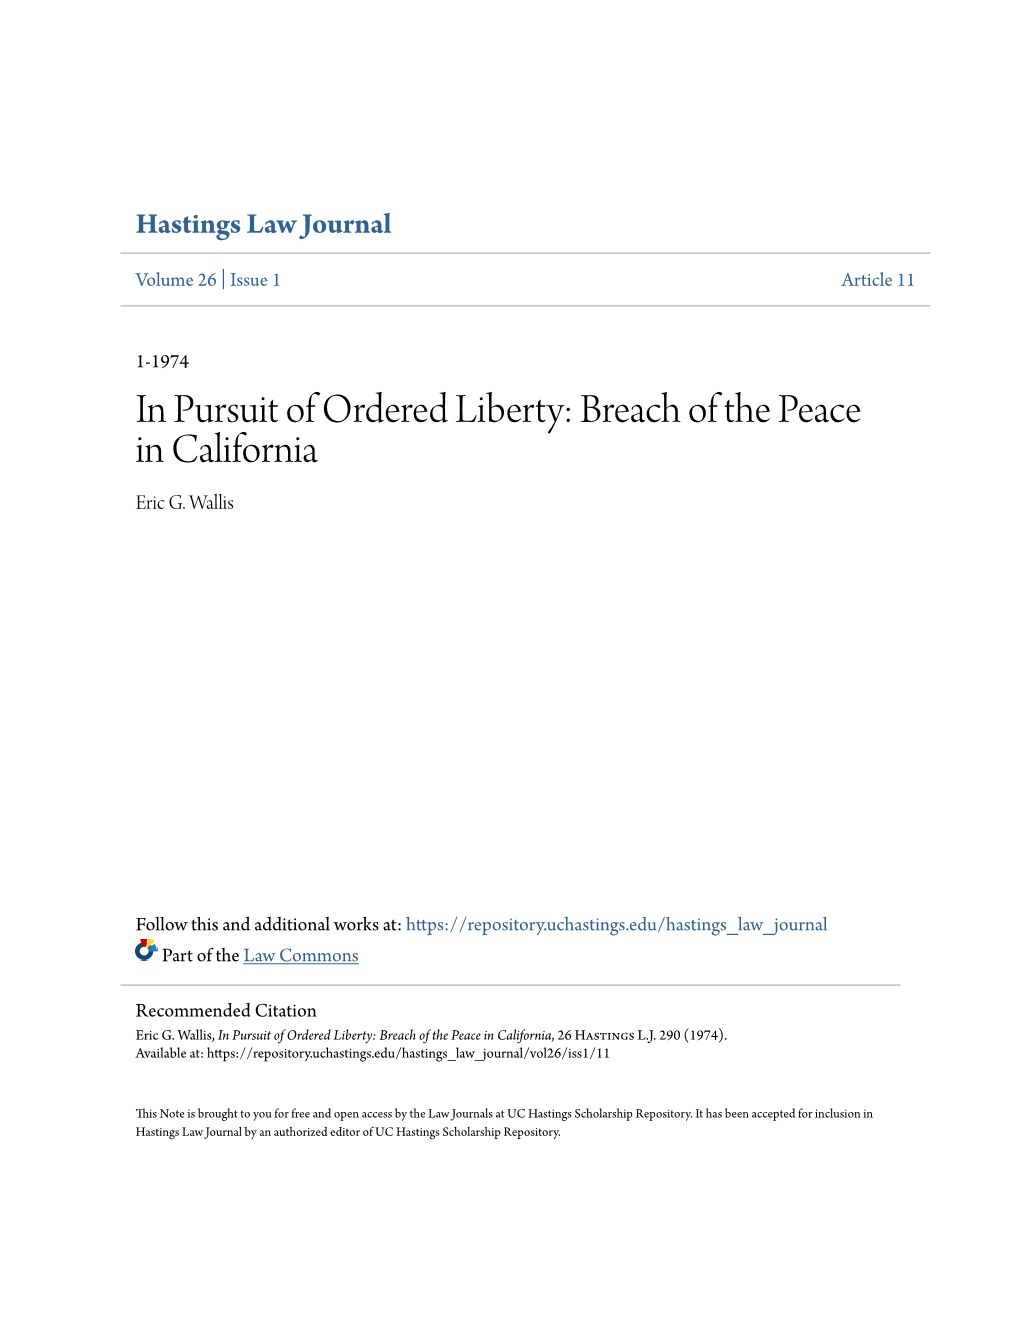 In Pursuit of Ordered Liberty: Breach of the Peace in California Eric G